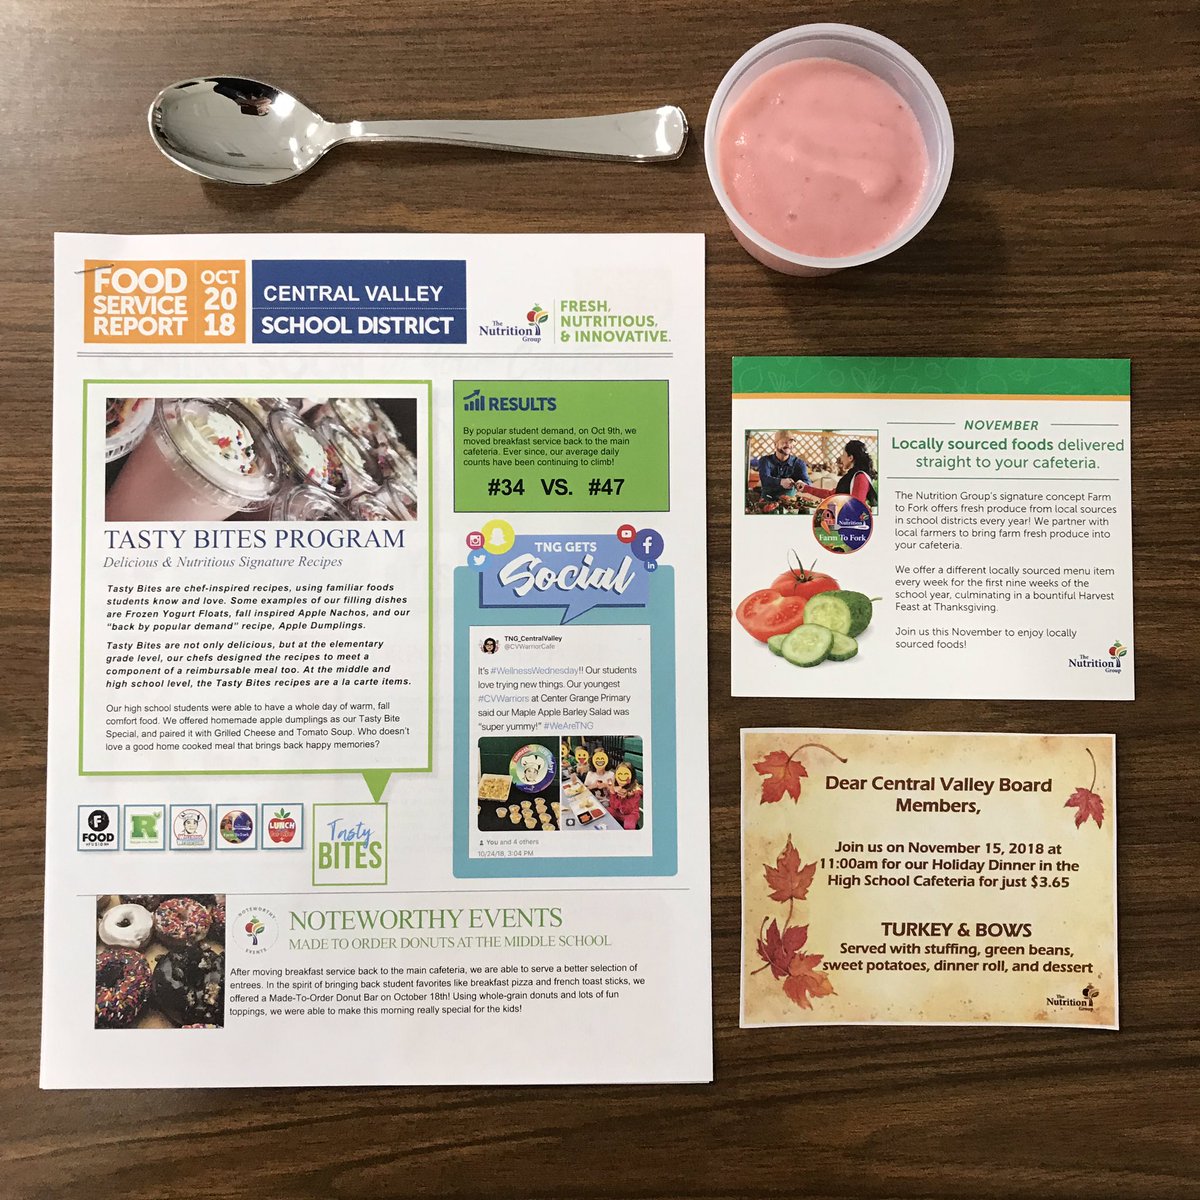 Sharing some #StrawberrySmoothie samples with the school board so they can see first-hand how delicious our food is! #WeAreTNG #MomentsMatter